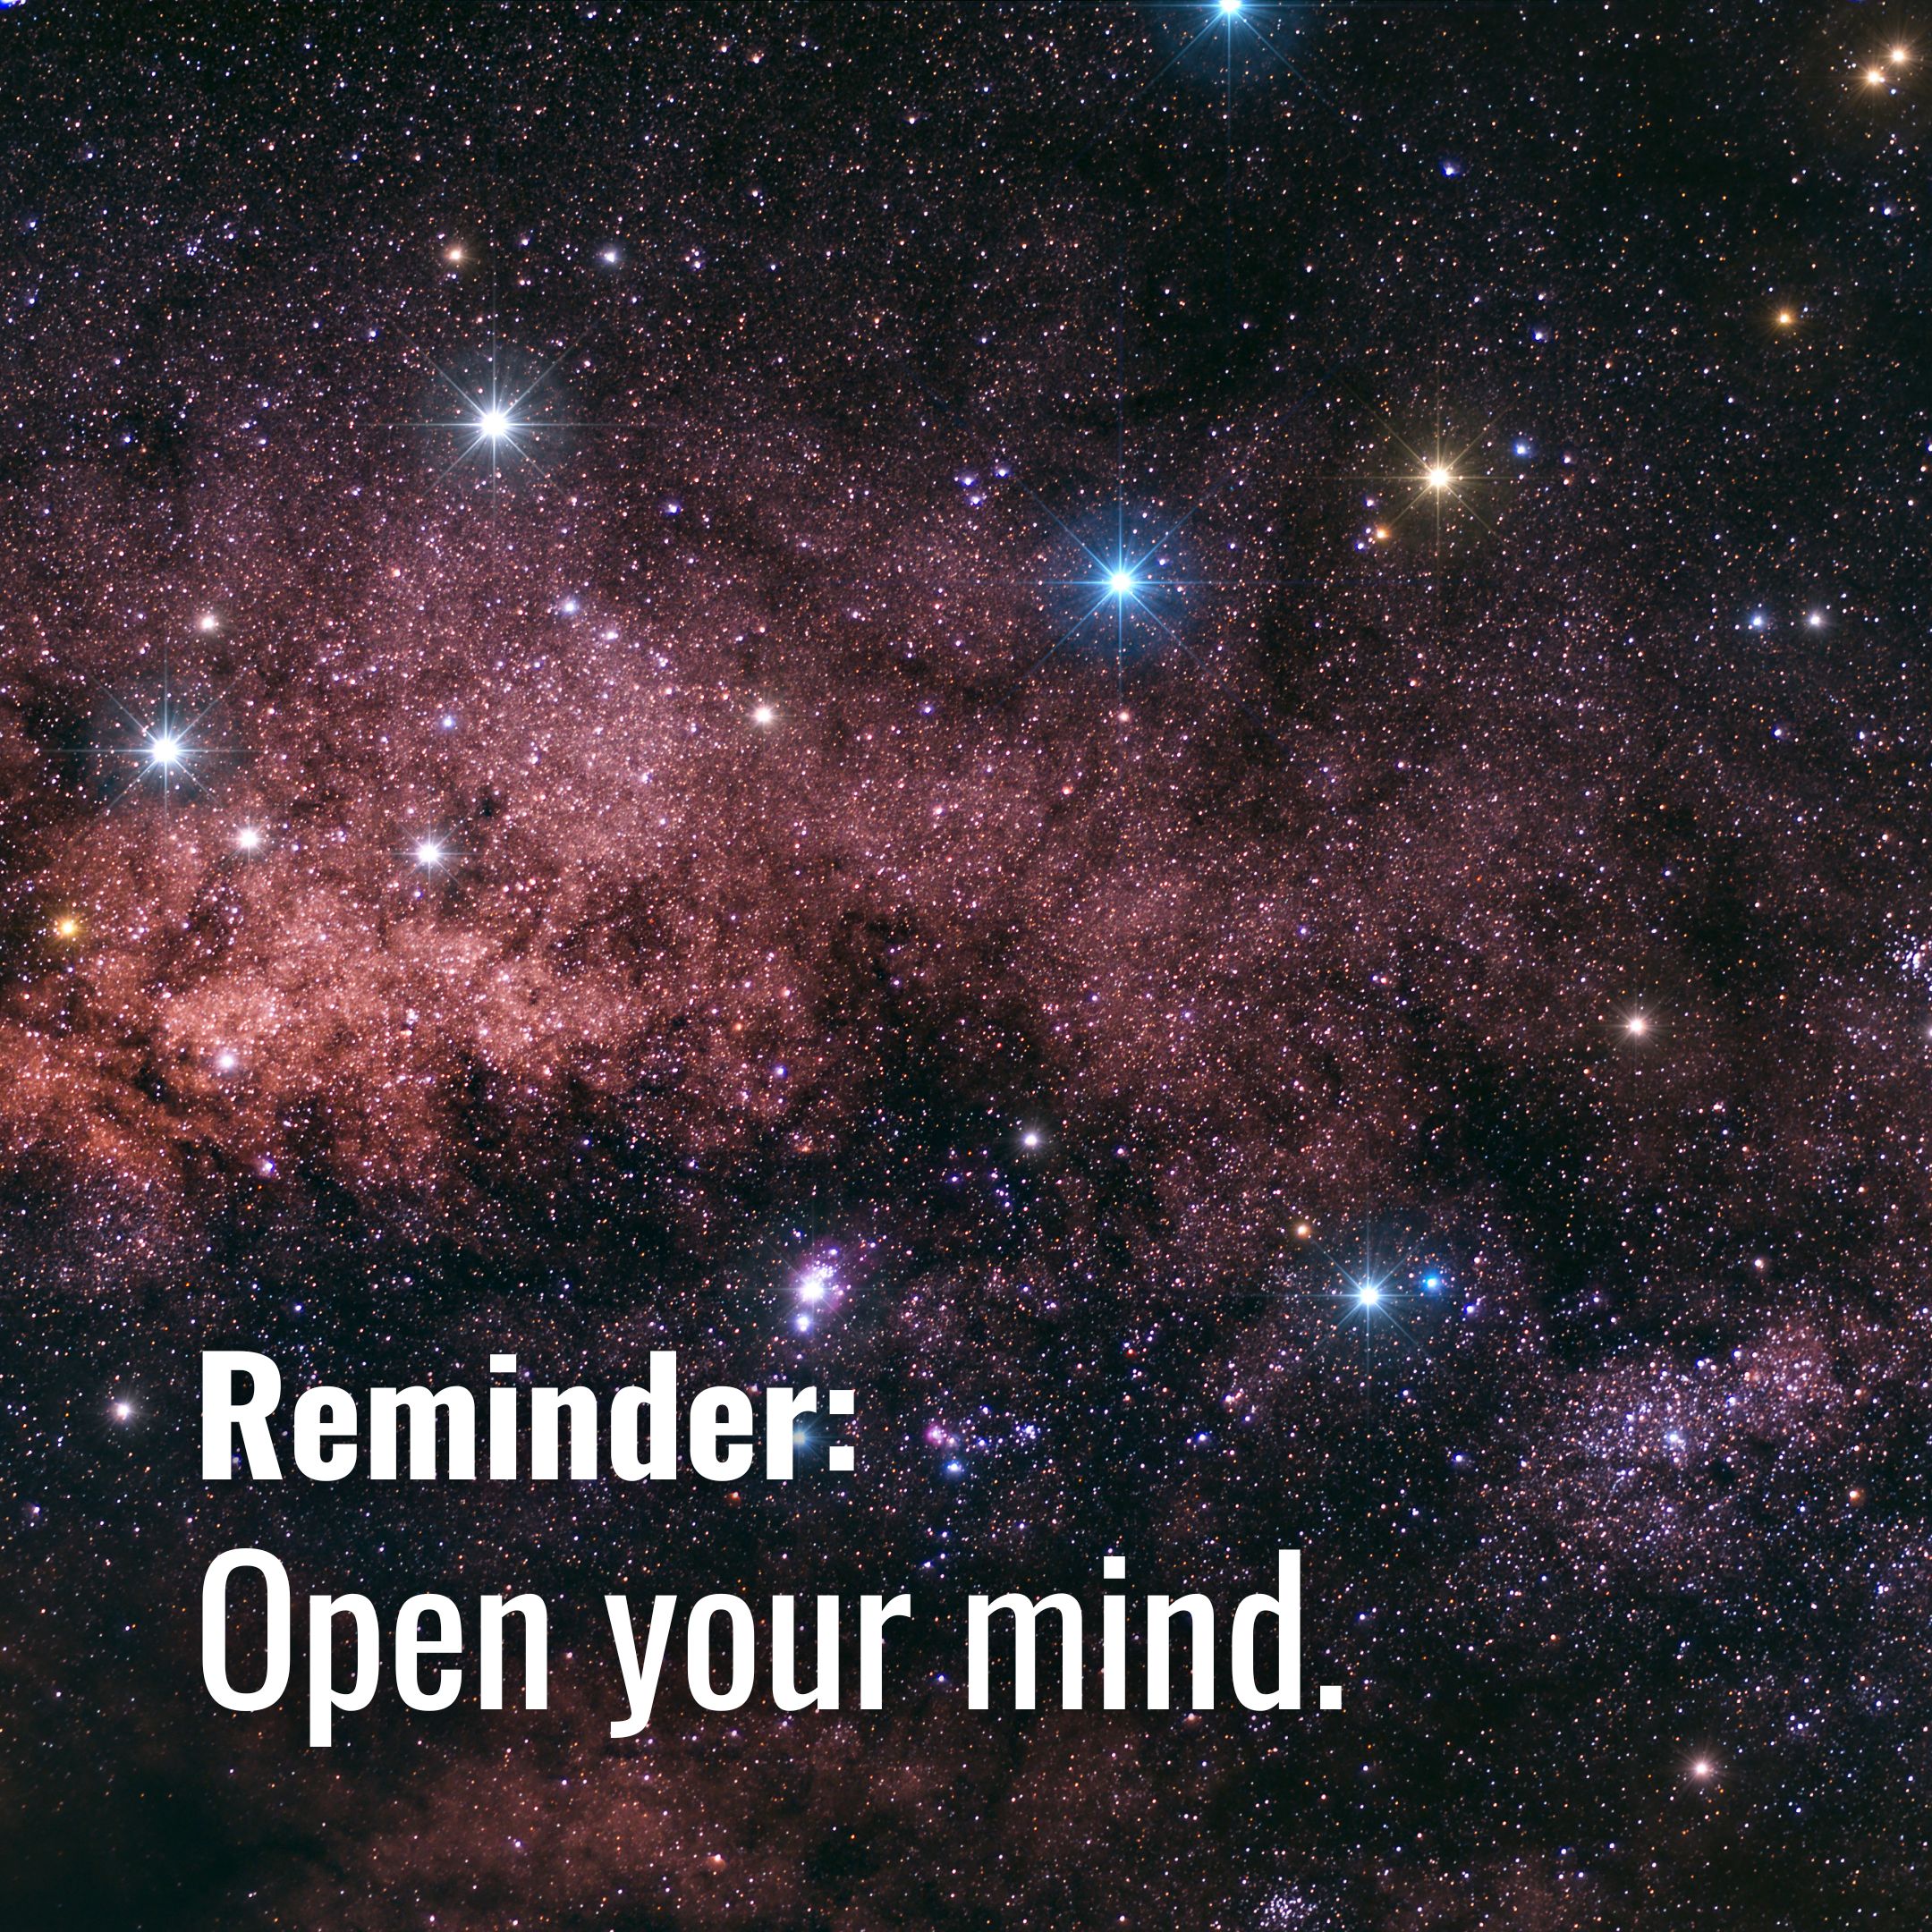 Open your mind.